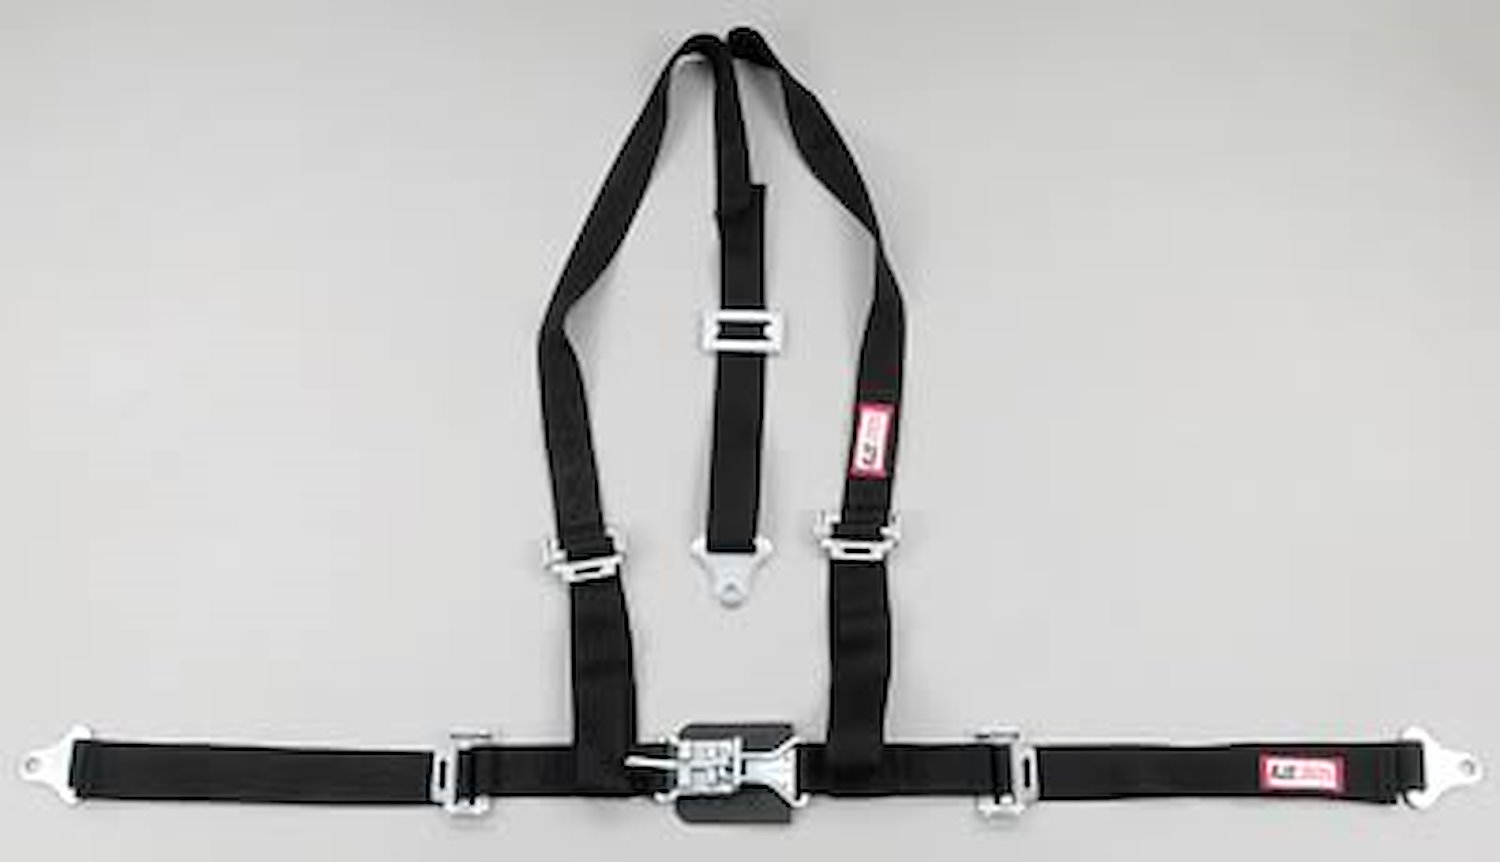 NON-SFI L&L HARNESS 2 PULL UP Lap Belt SNAP SEWN IN 2 S.H. Individual ROLL BAR Mount w/STERNUM STRAP WRAP/BOLT RED